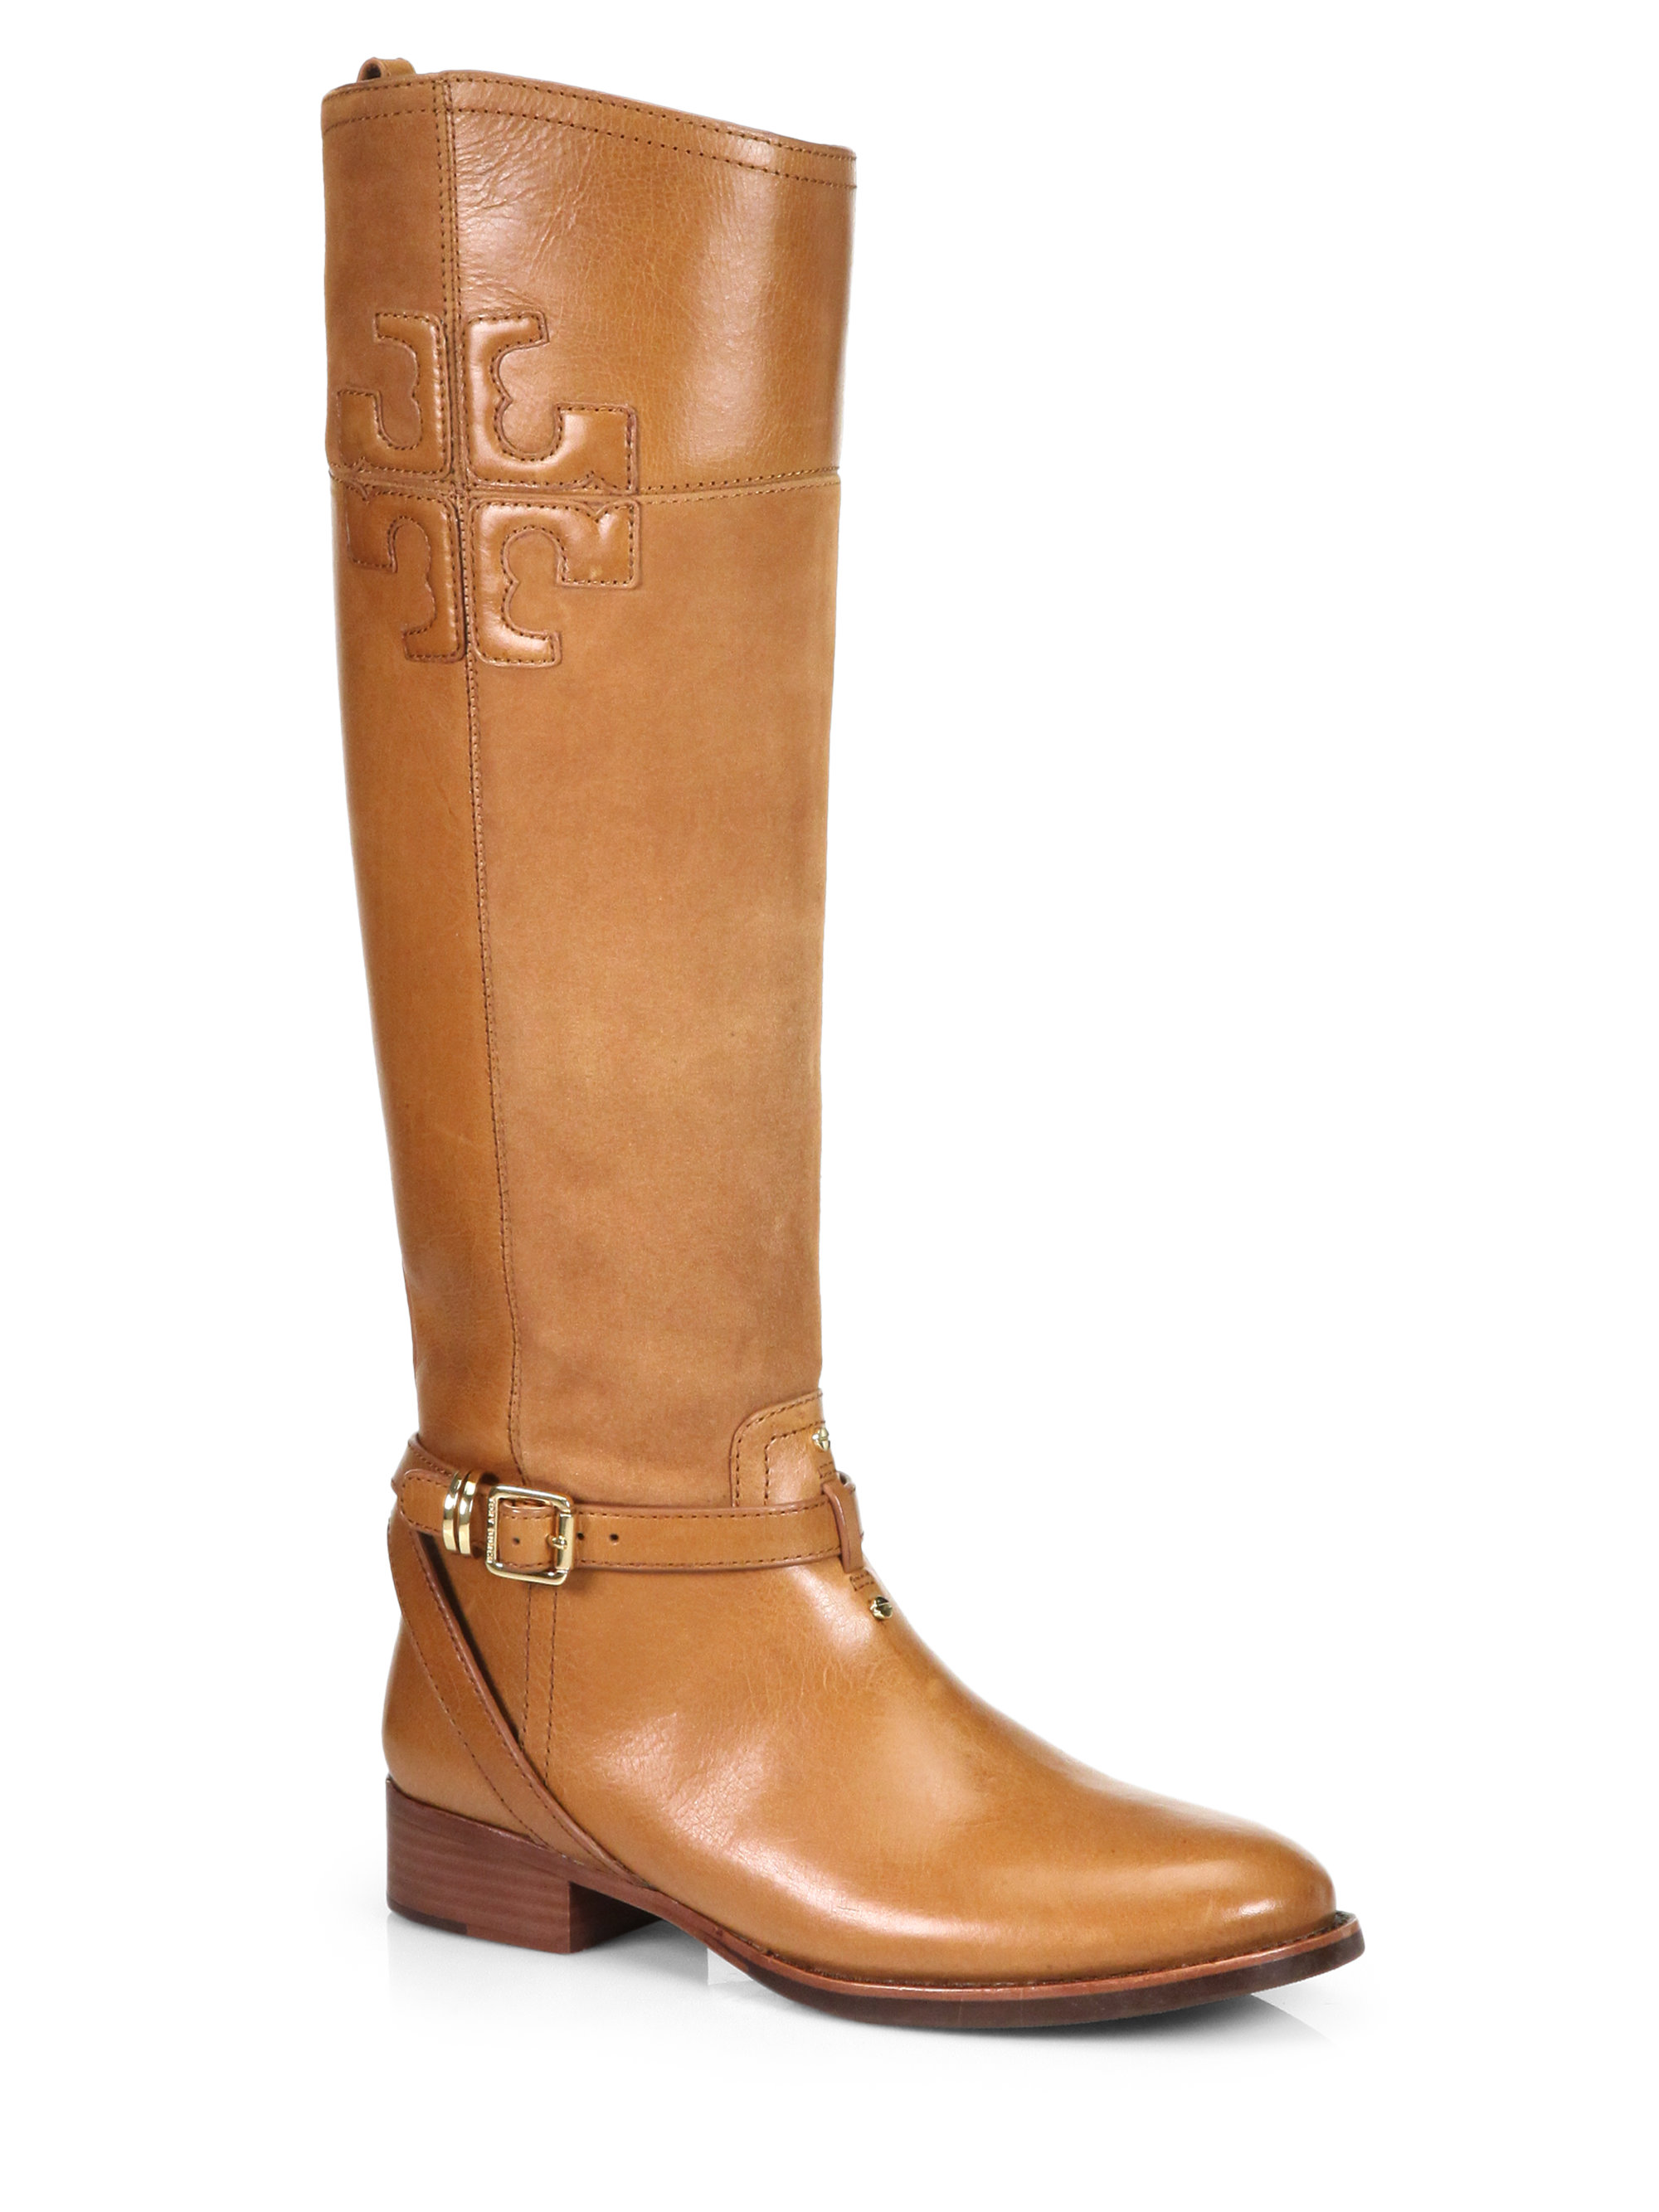 Lyst - Tory burch Lizzie Leather Riding Boots in Brown